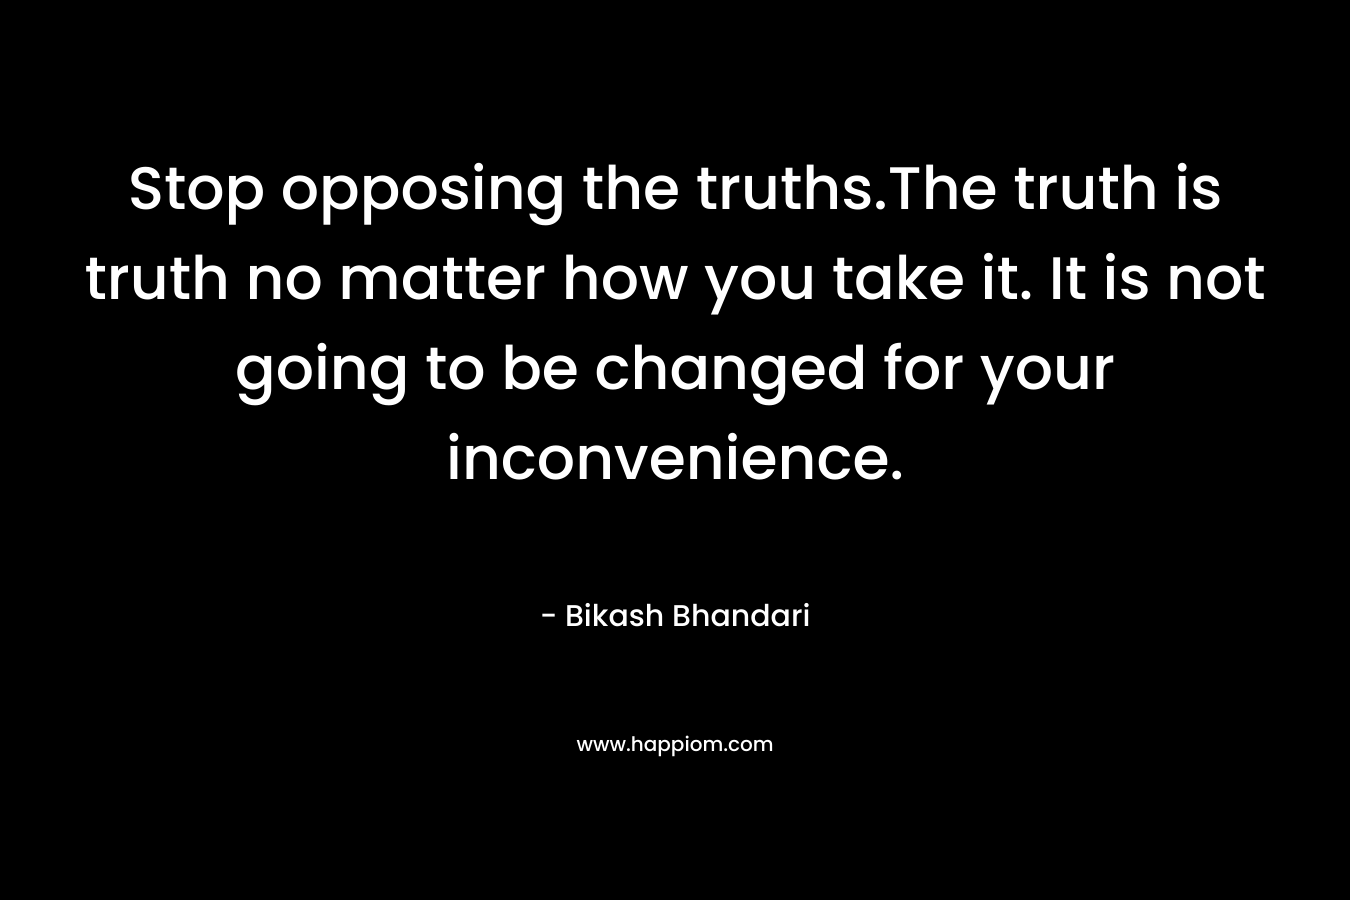 Stop opposing the truths.The truth is truth no matter how you take it. It is not going to be changed for your inconvenience. – Bikash Bhandari